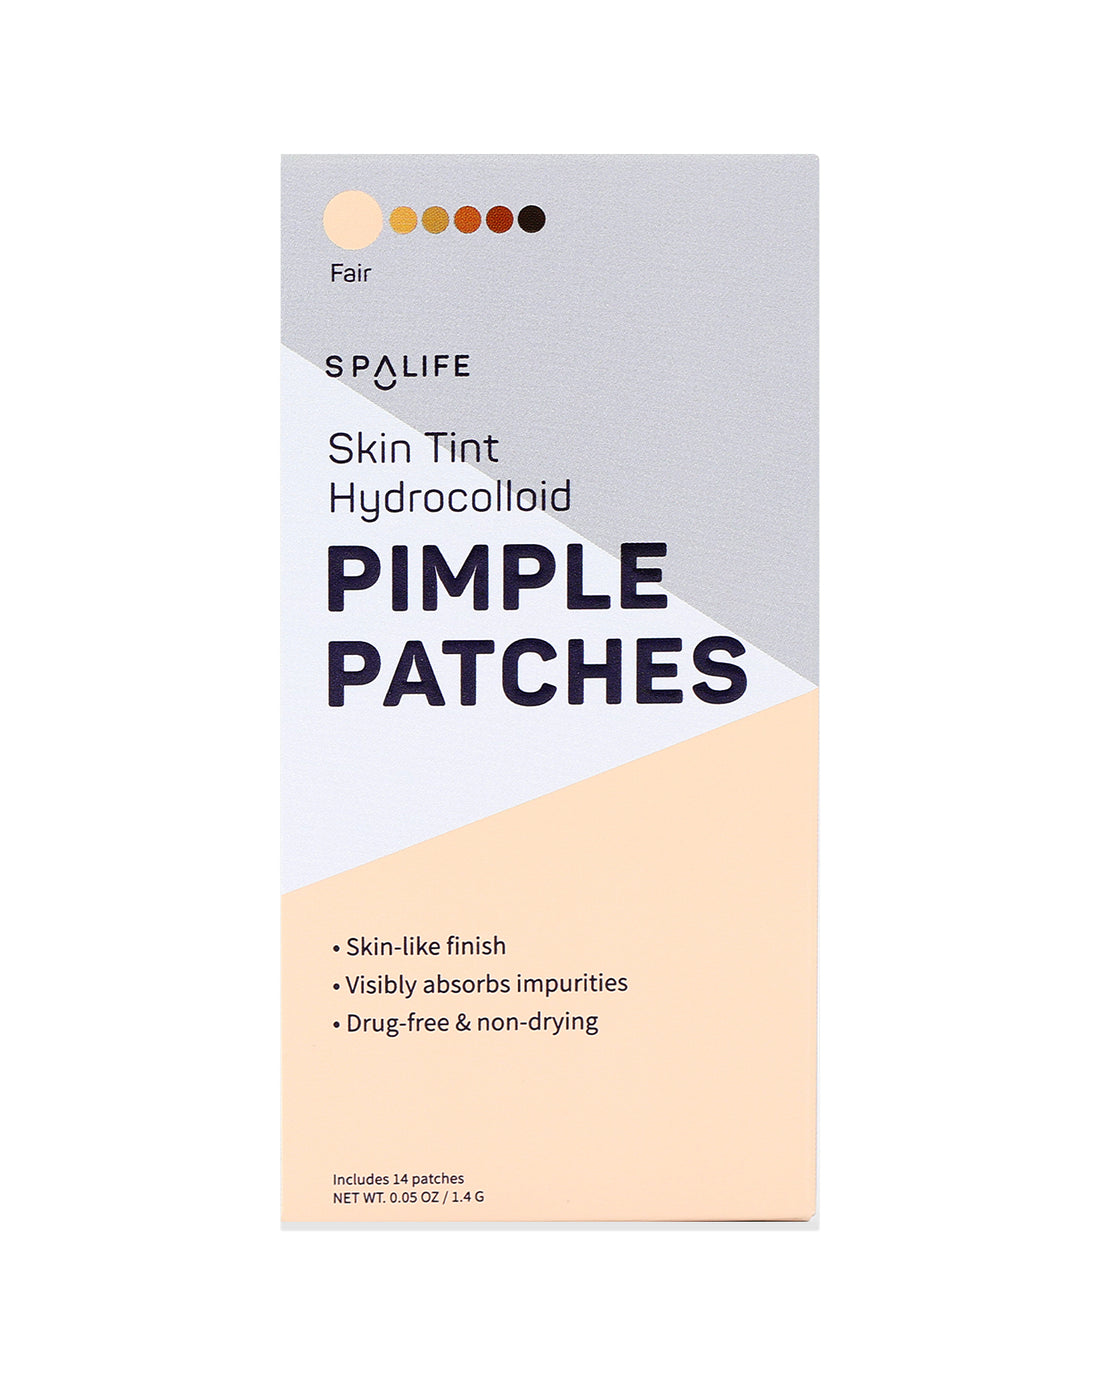 Skin_tint_pimple_patches_packe-569